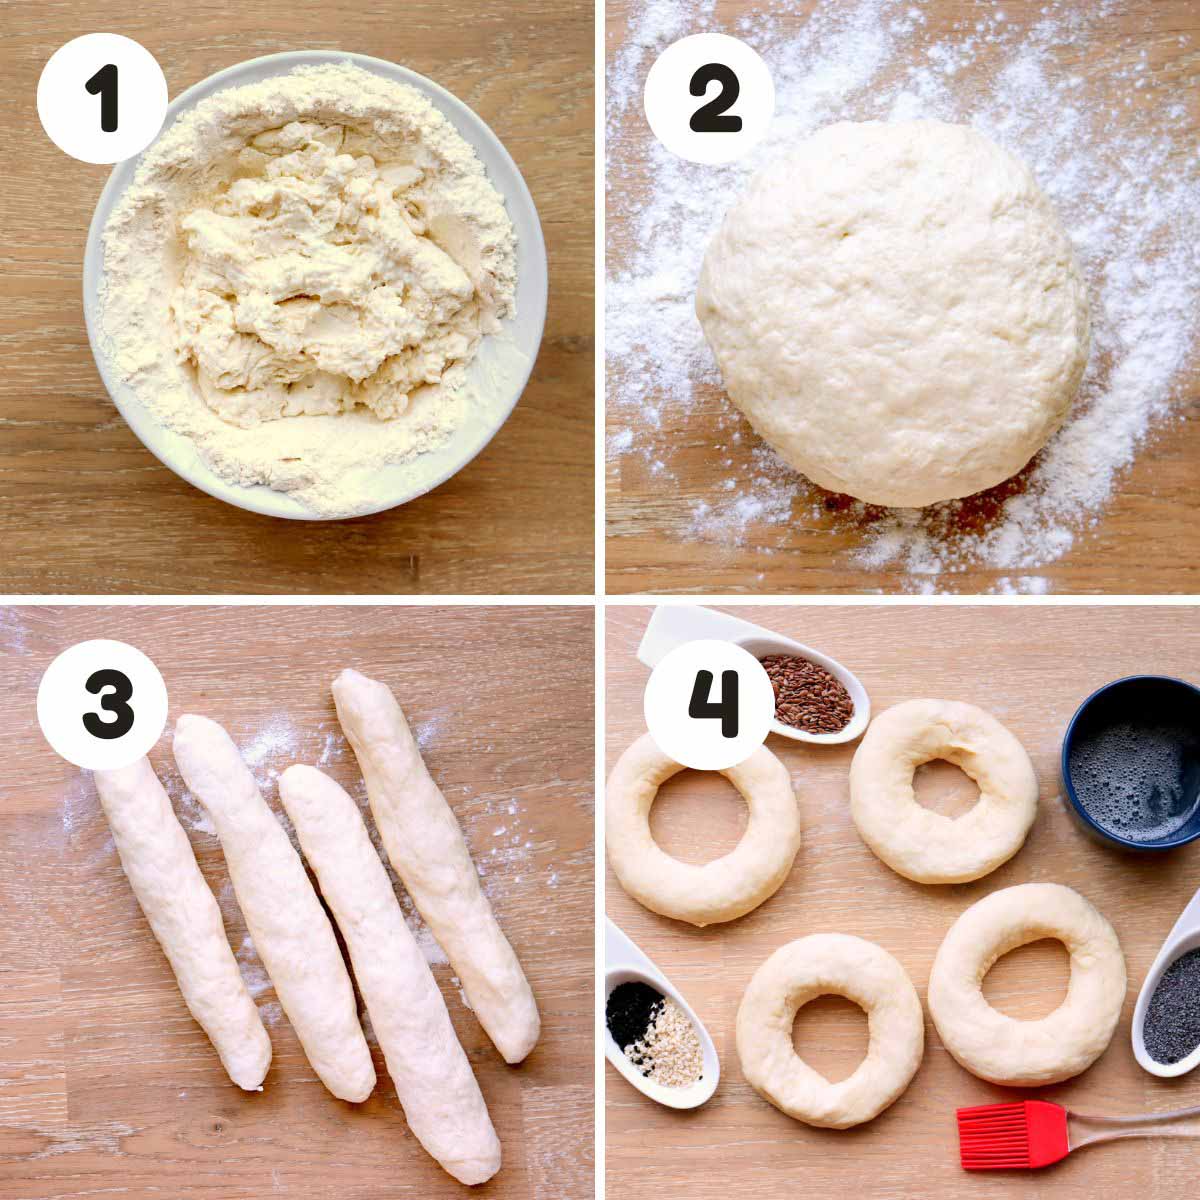 Steps to make the bagels.